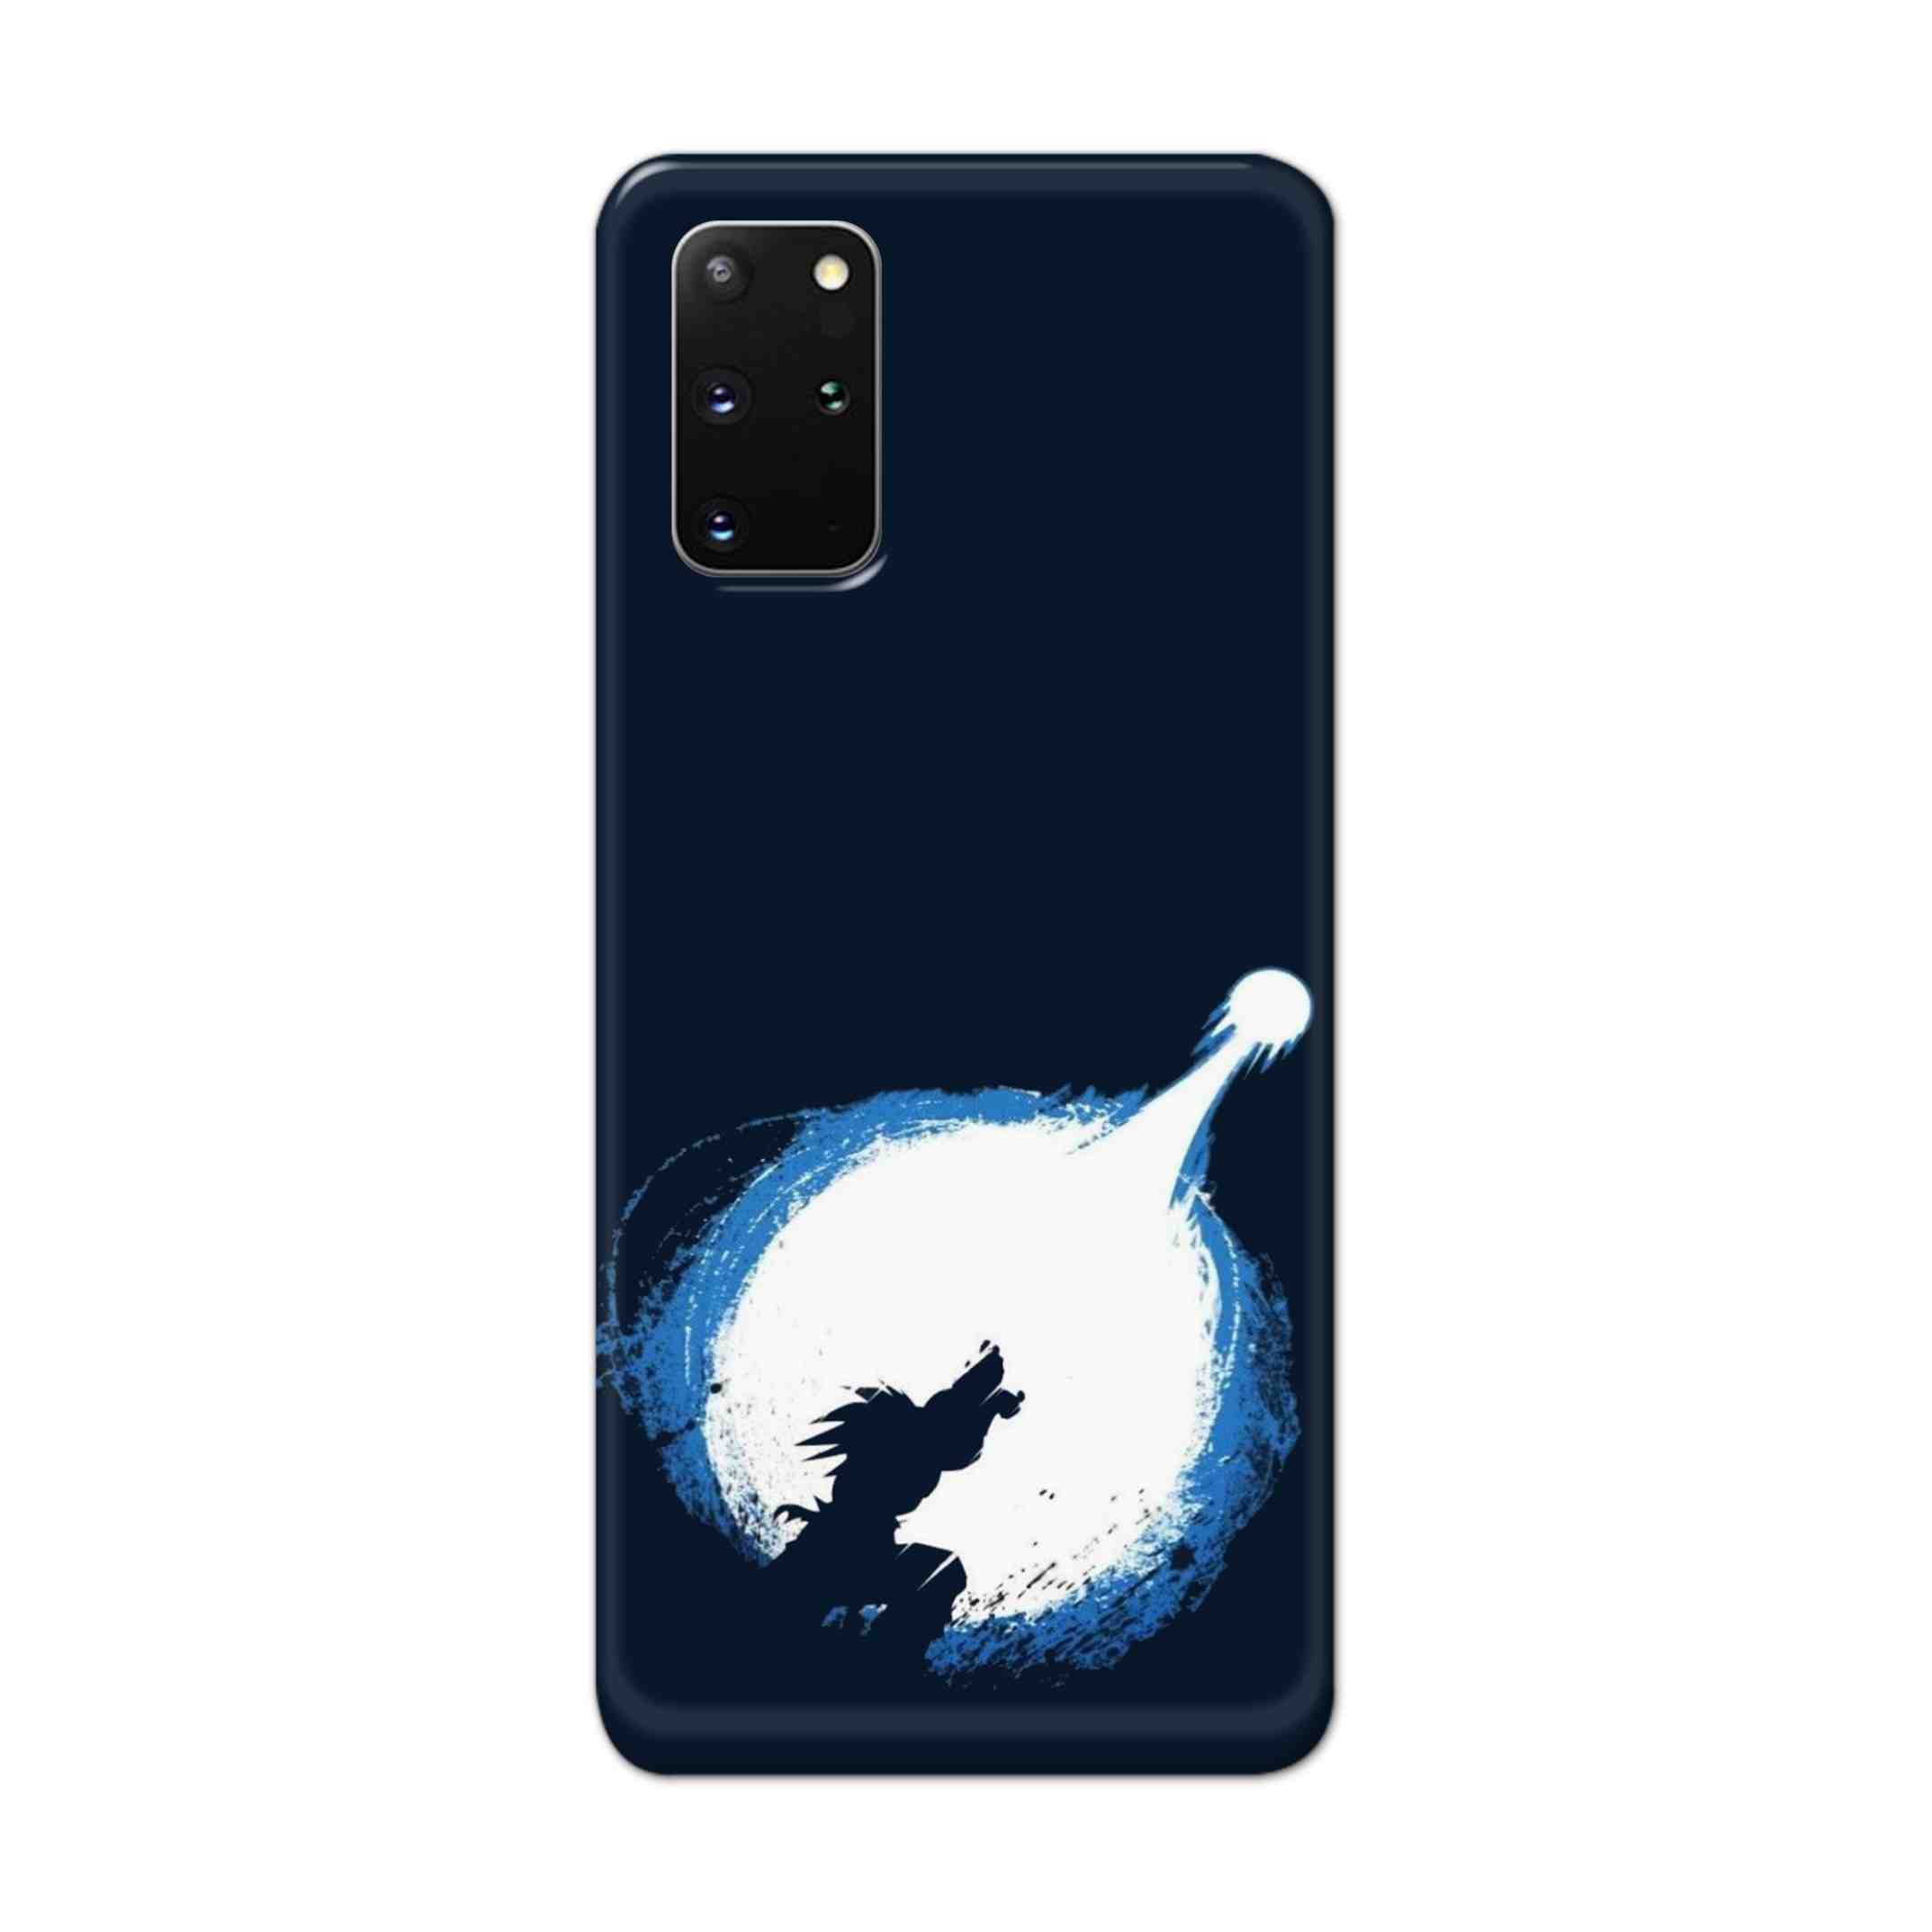 Buy Goku Power Hard Back Mobile Phone Case Cover For Samsung Galaxy S20 Plus Online